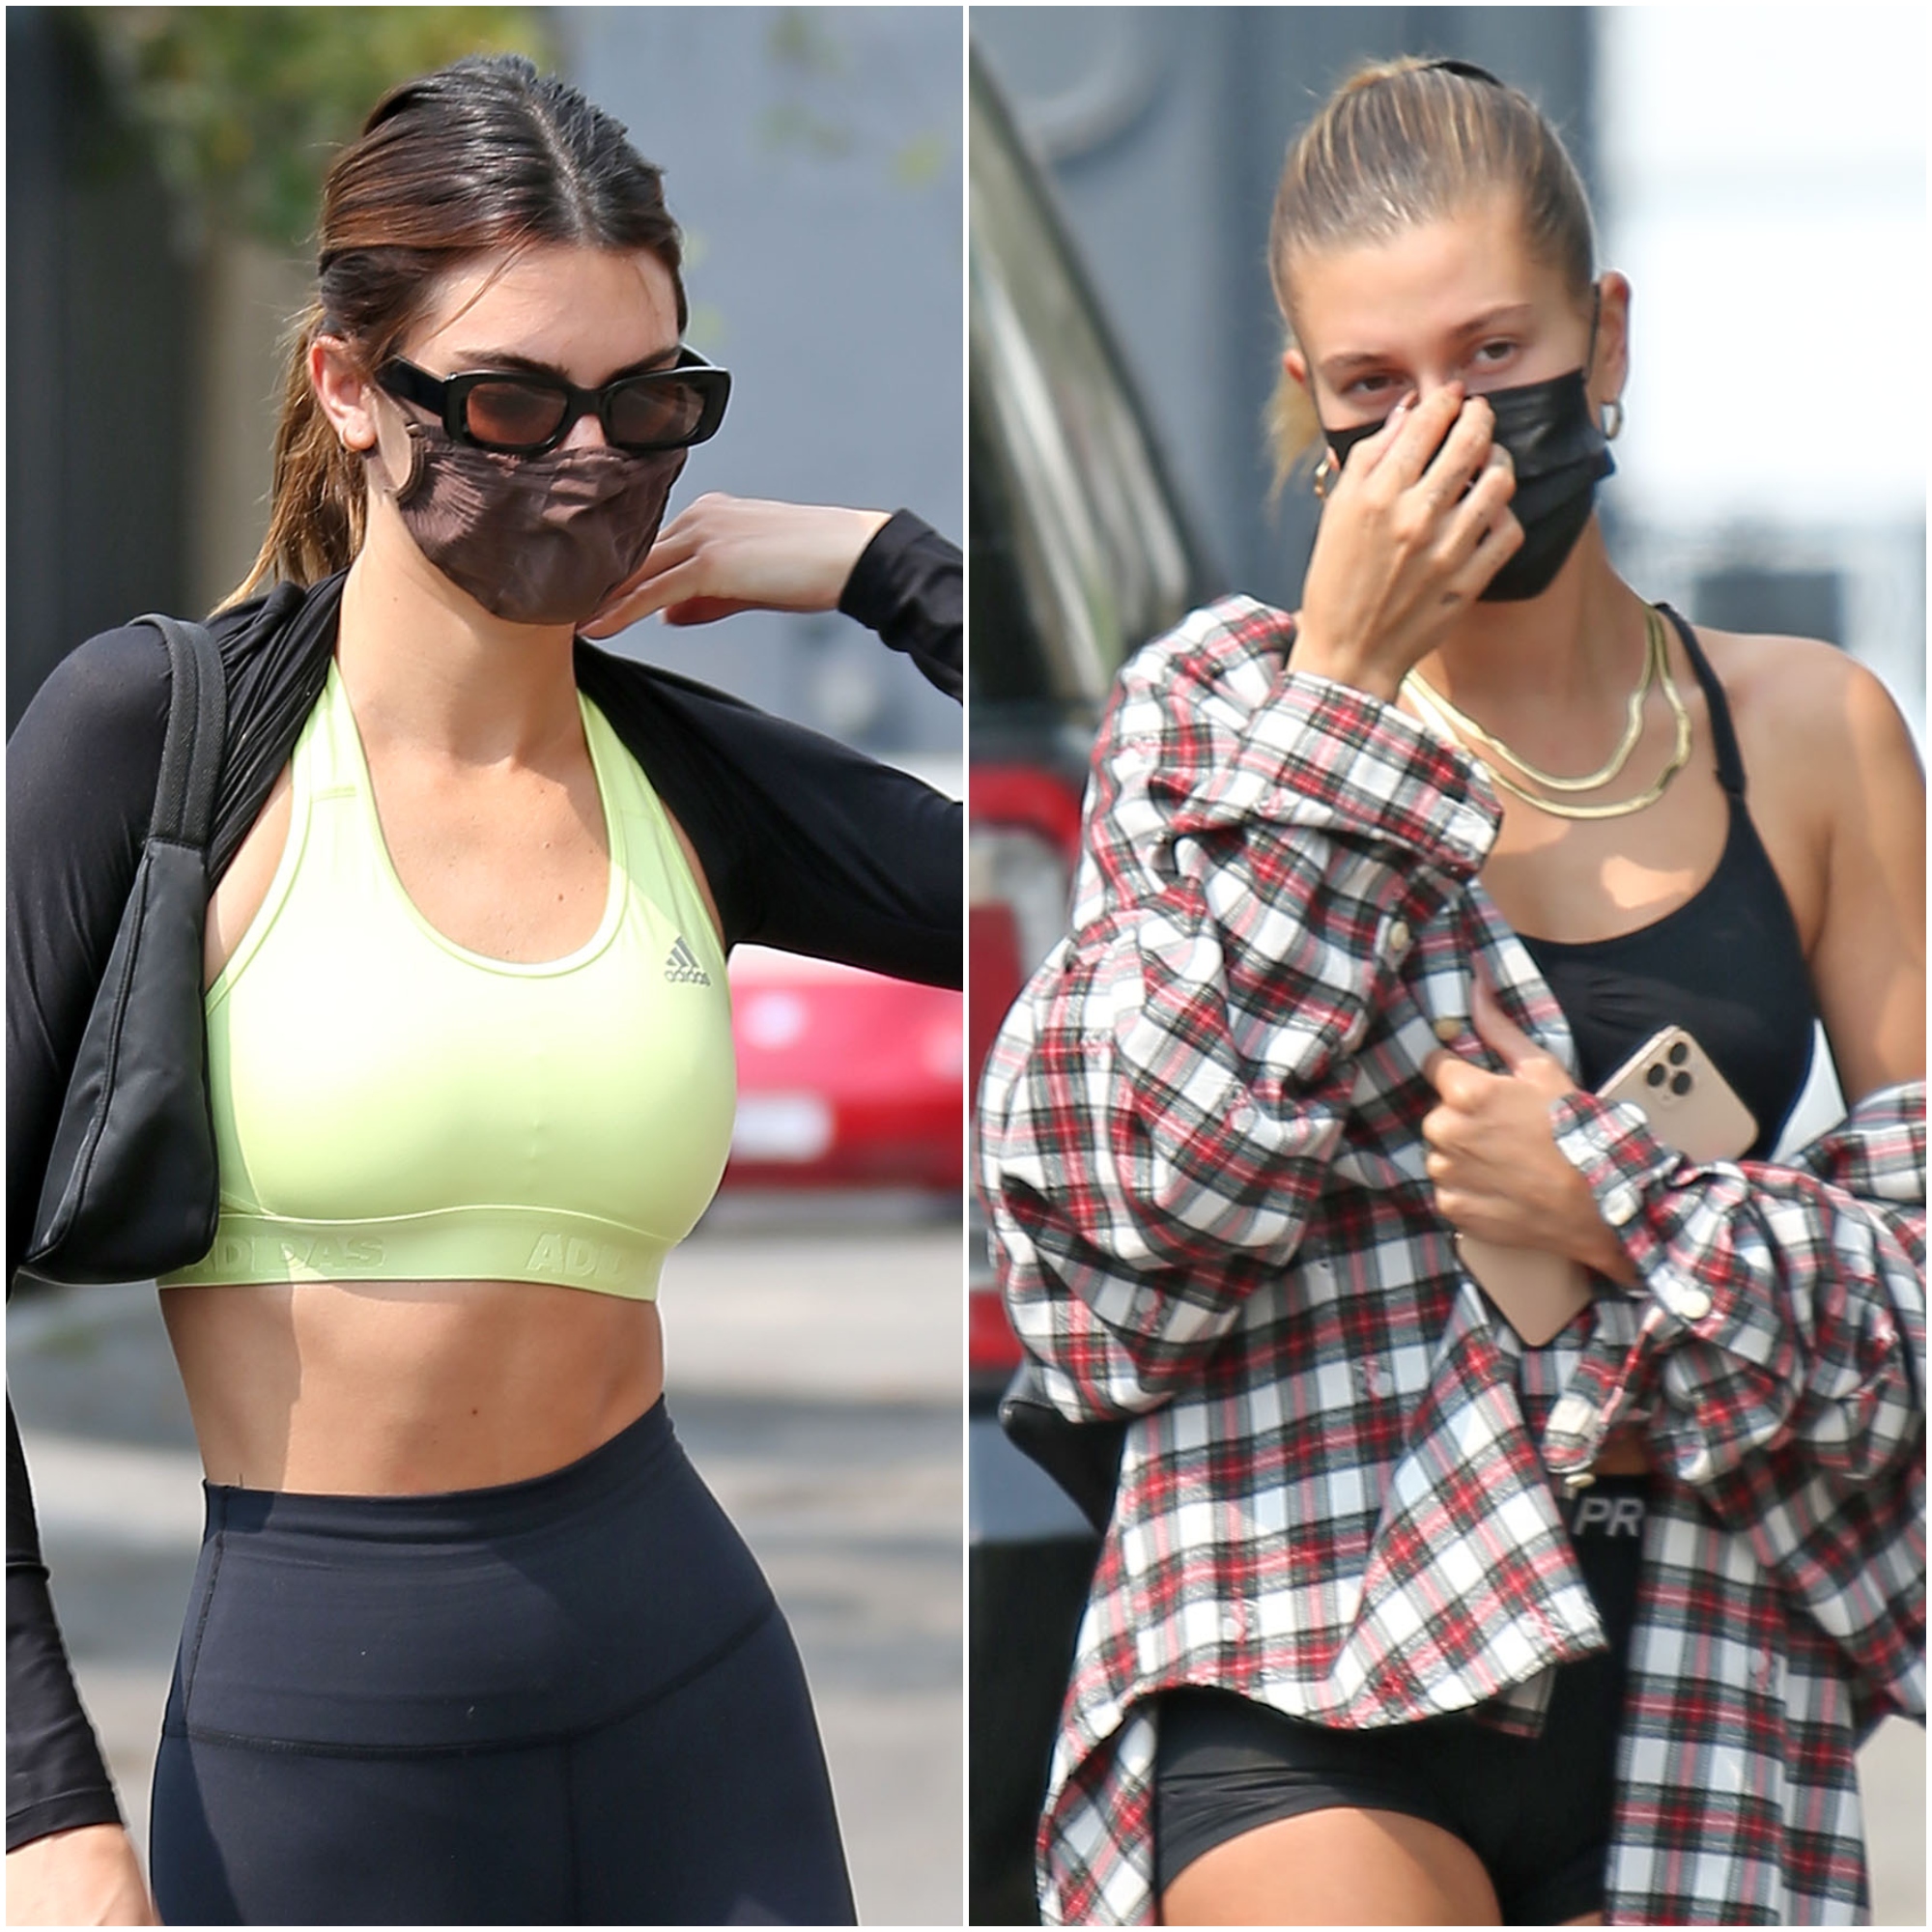 Kendall Jenner and Hailey Baldwin Rock Workout Gear at Lunch